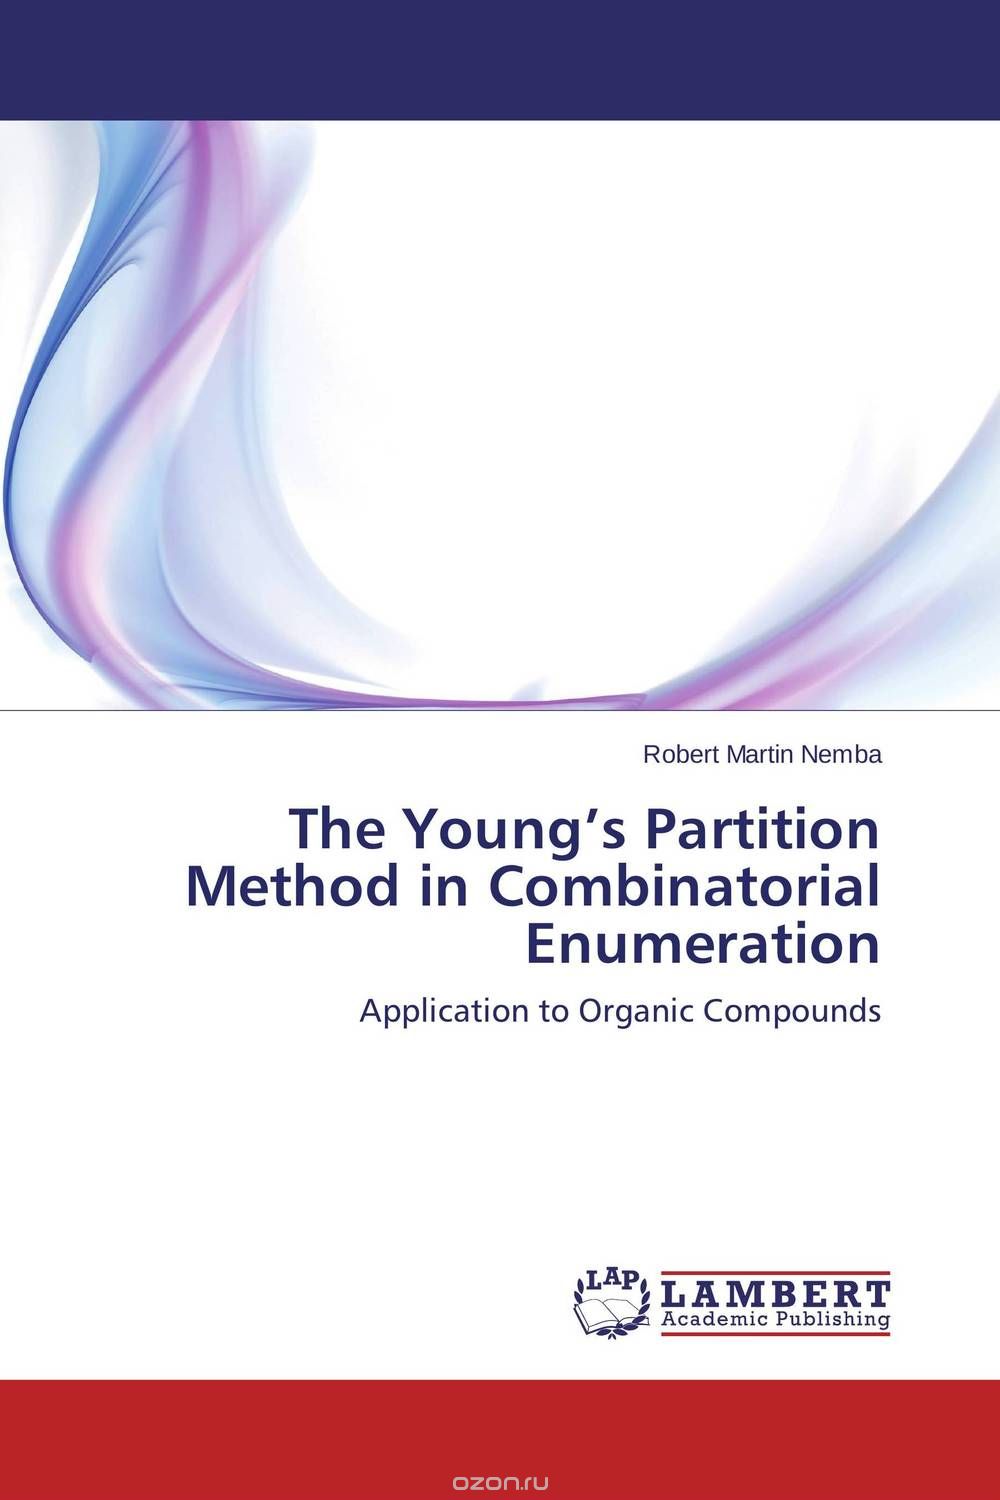 Скачать книгу "The Young’s Partition Method in Combinatorial Enumeration"